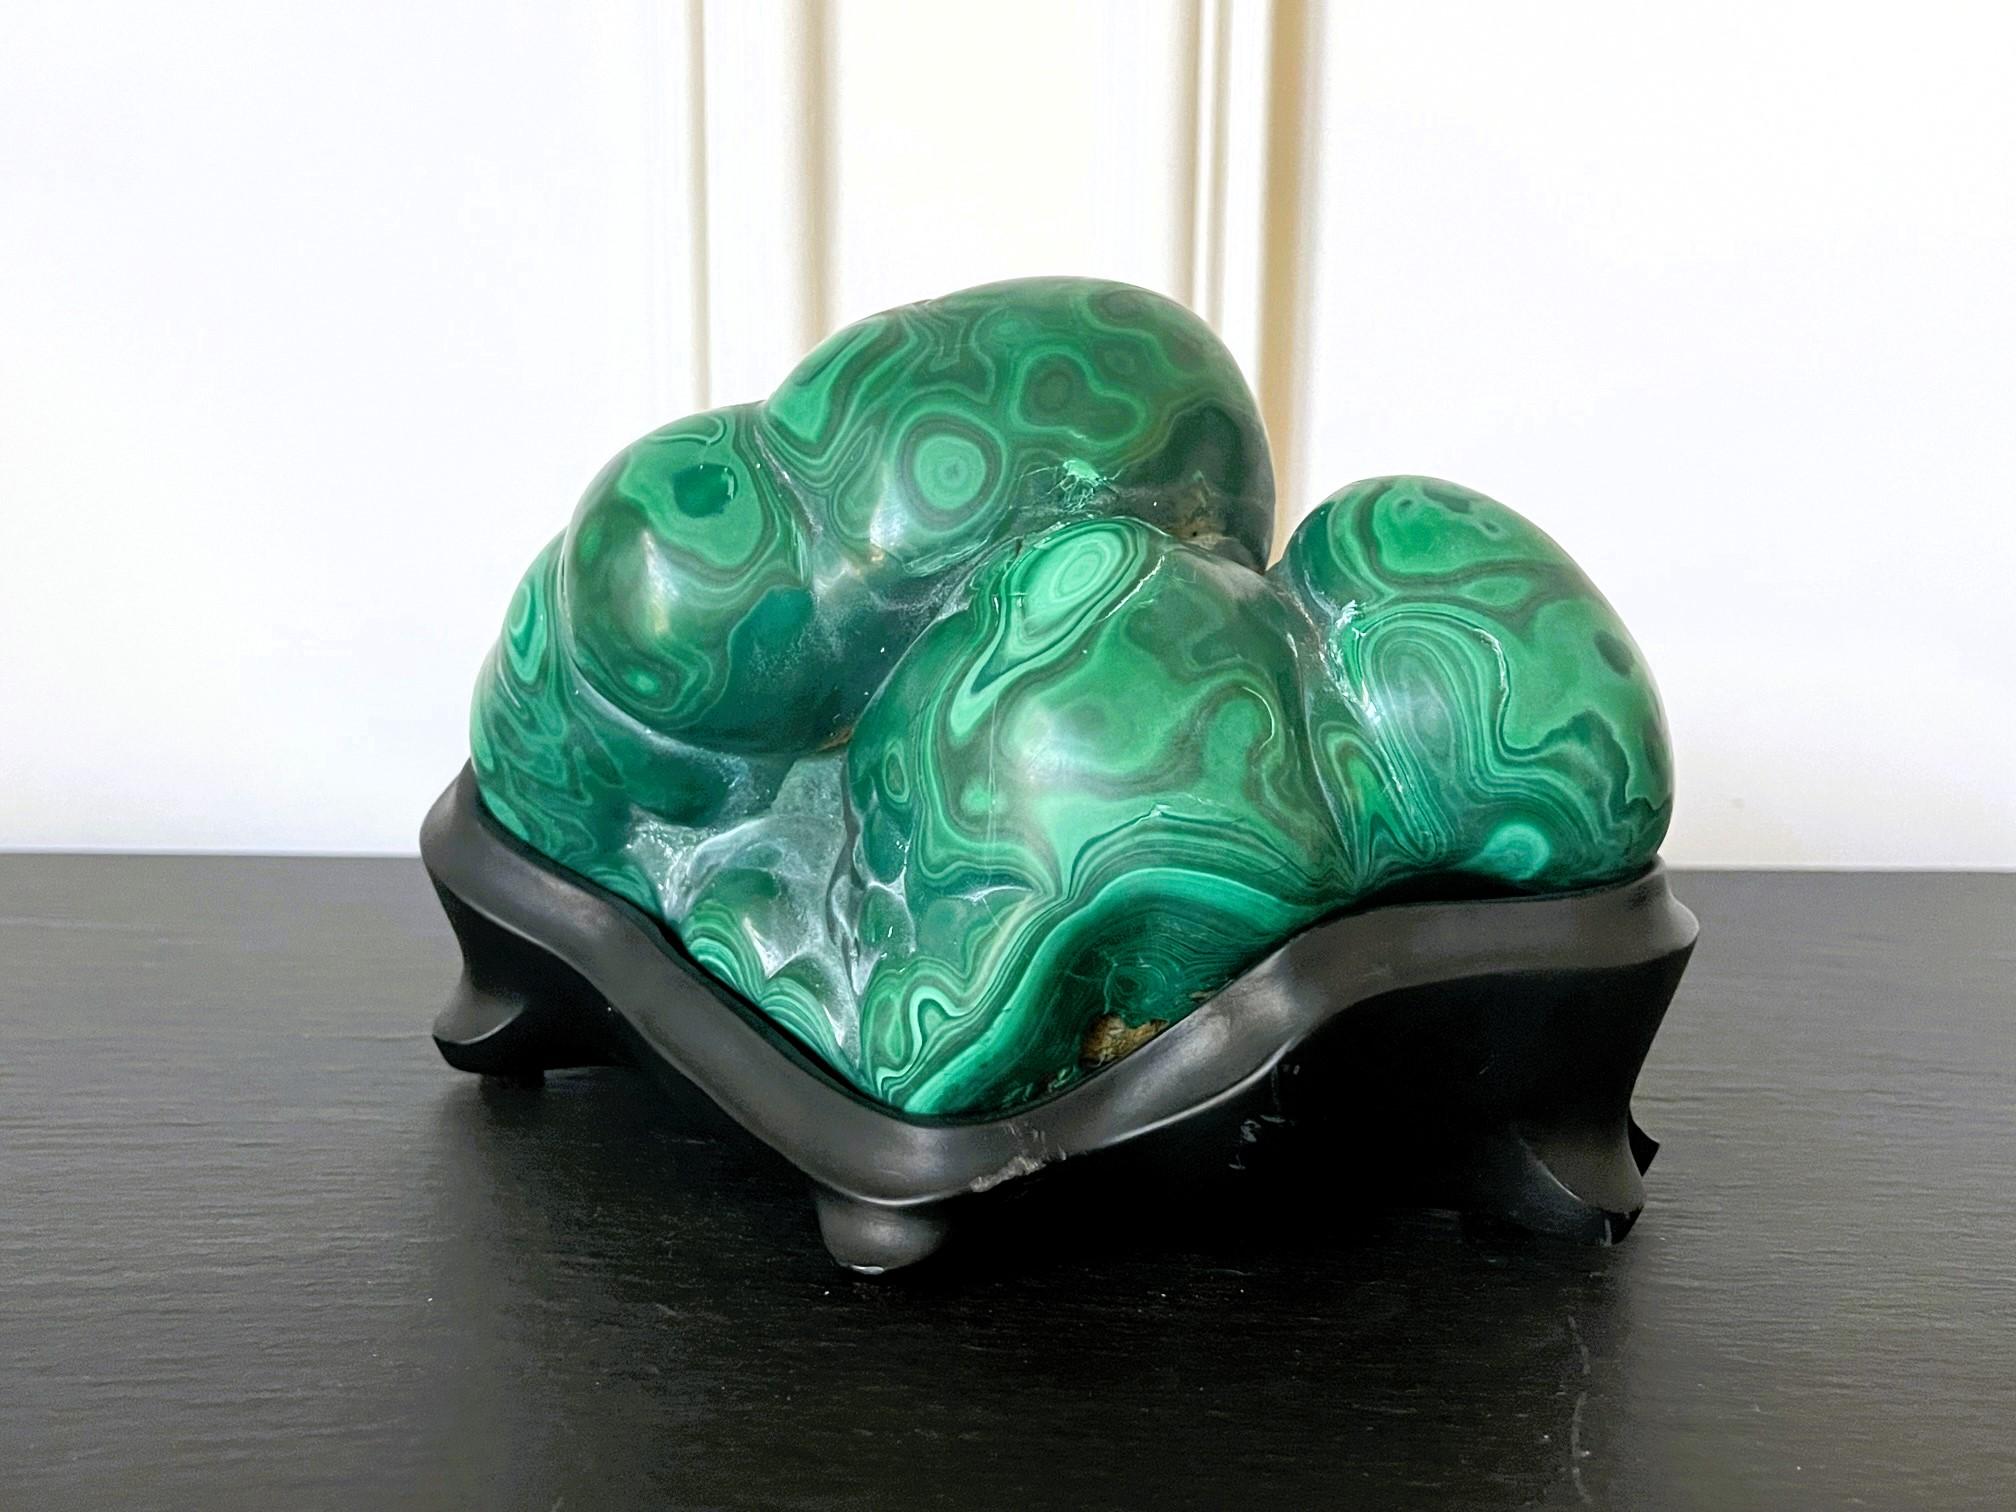 Displayed on a black custom carved wood stand, this solid malachite rock specimen with intense green and black colors functions as a Chinese scholar stone. The gemstone showcases the prominent botryoidal form and was polished on all sides revealing